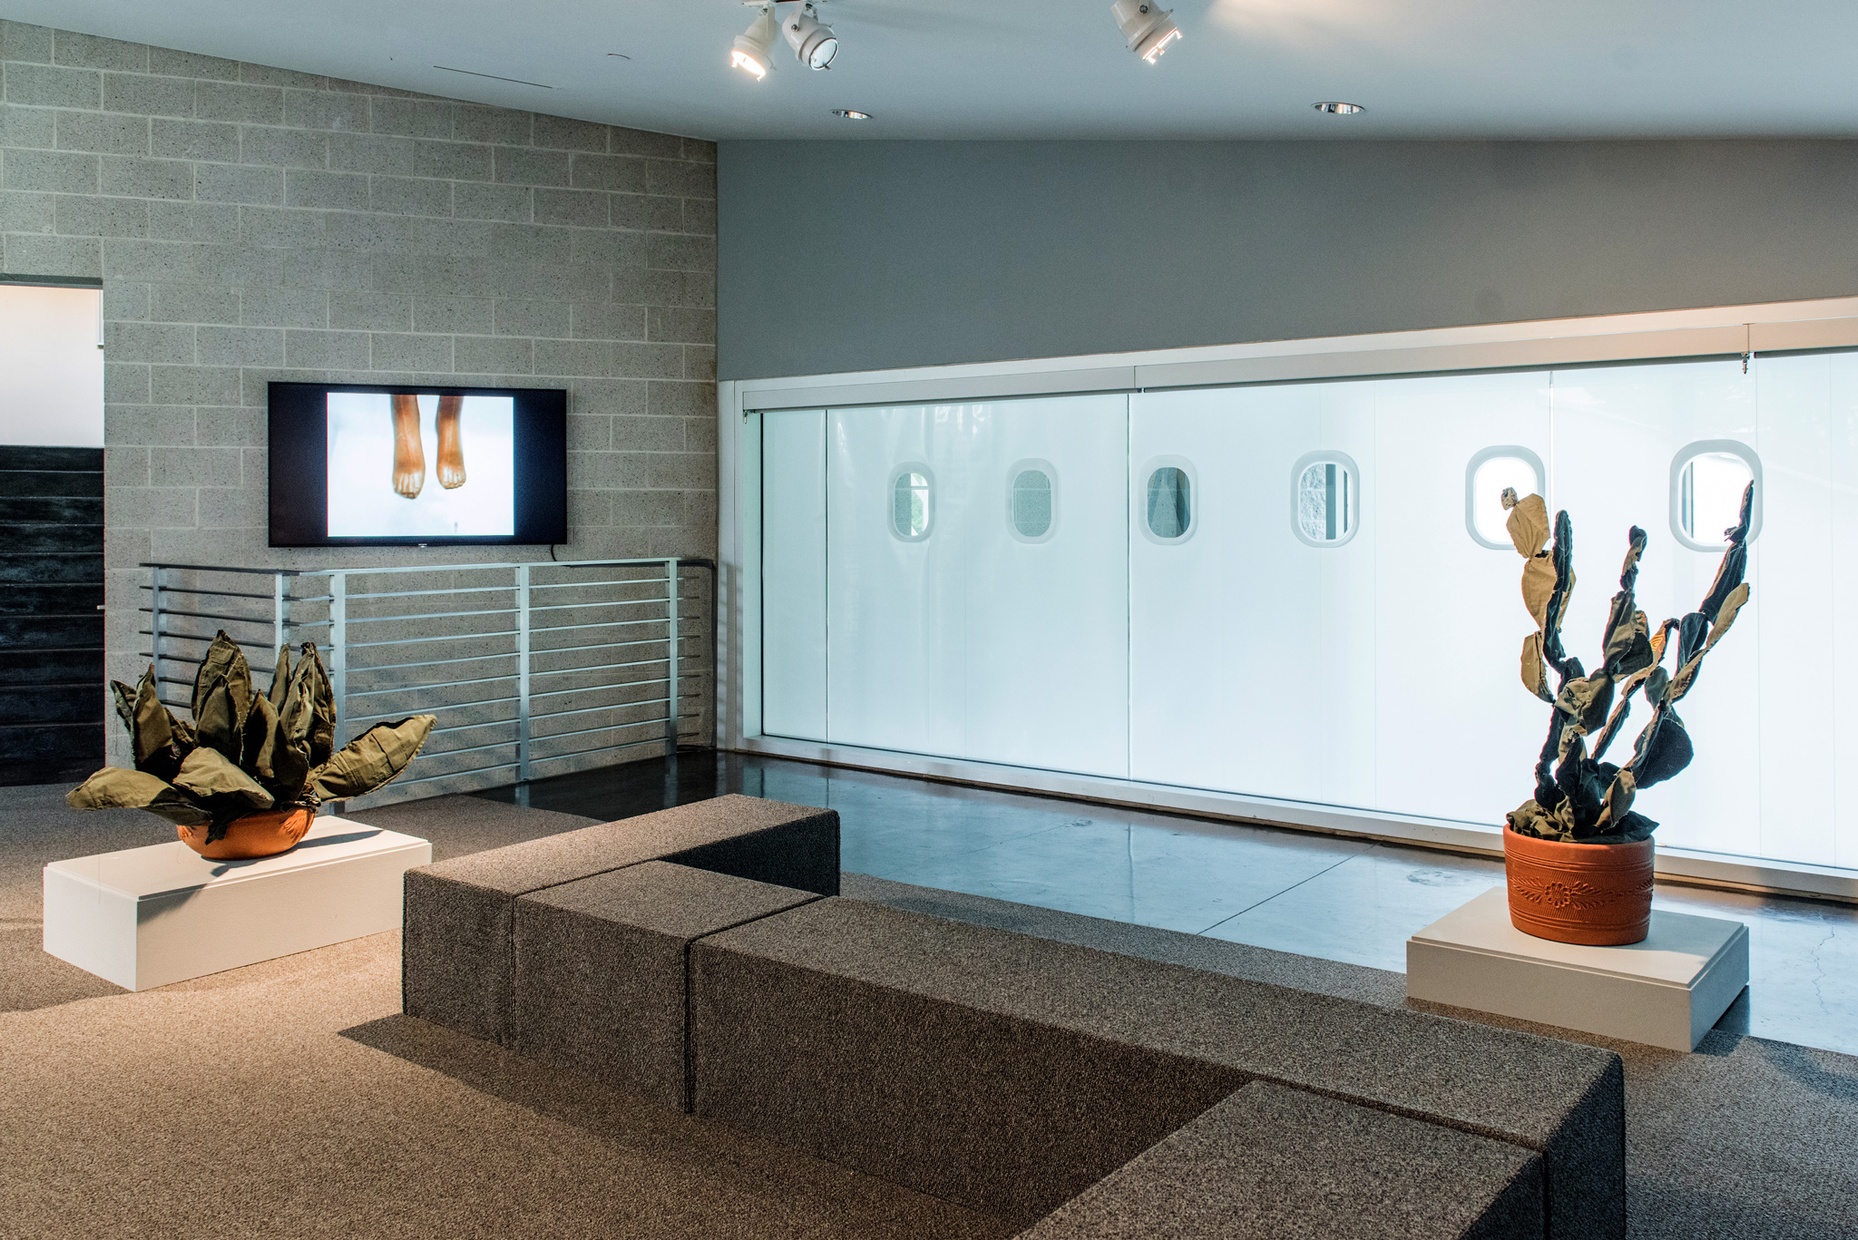 A bright wall of windows lets light into a carpeted gallery with soft cactus sculptures on pedestals and a mounted tv monitor showing a video.